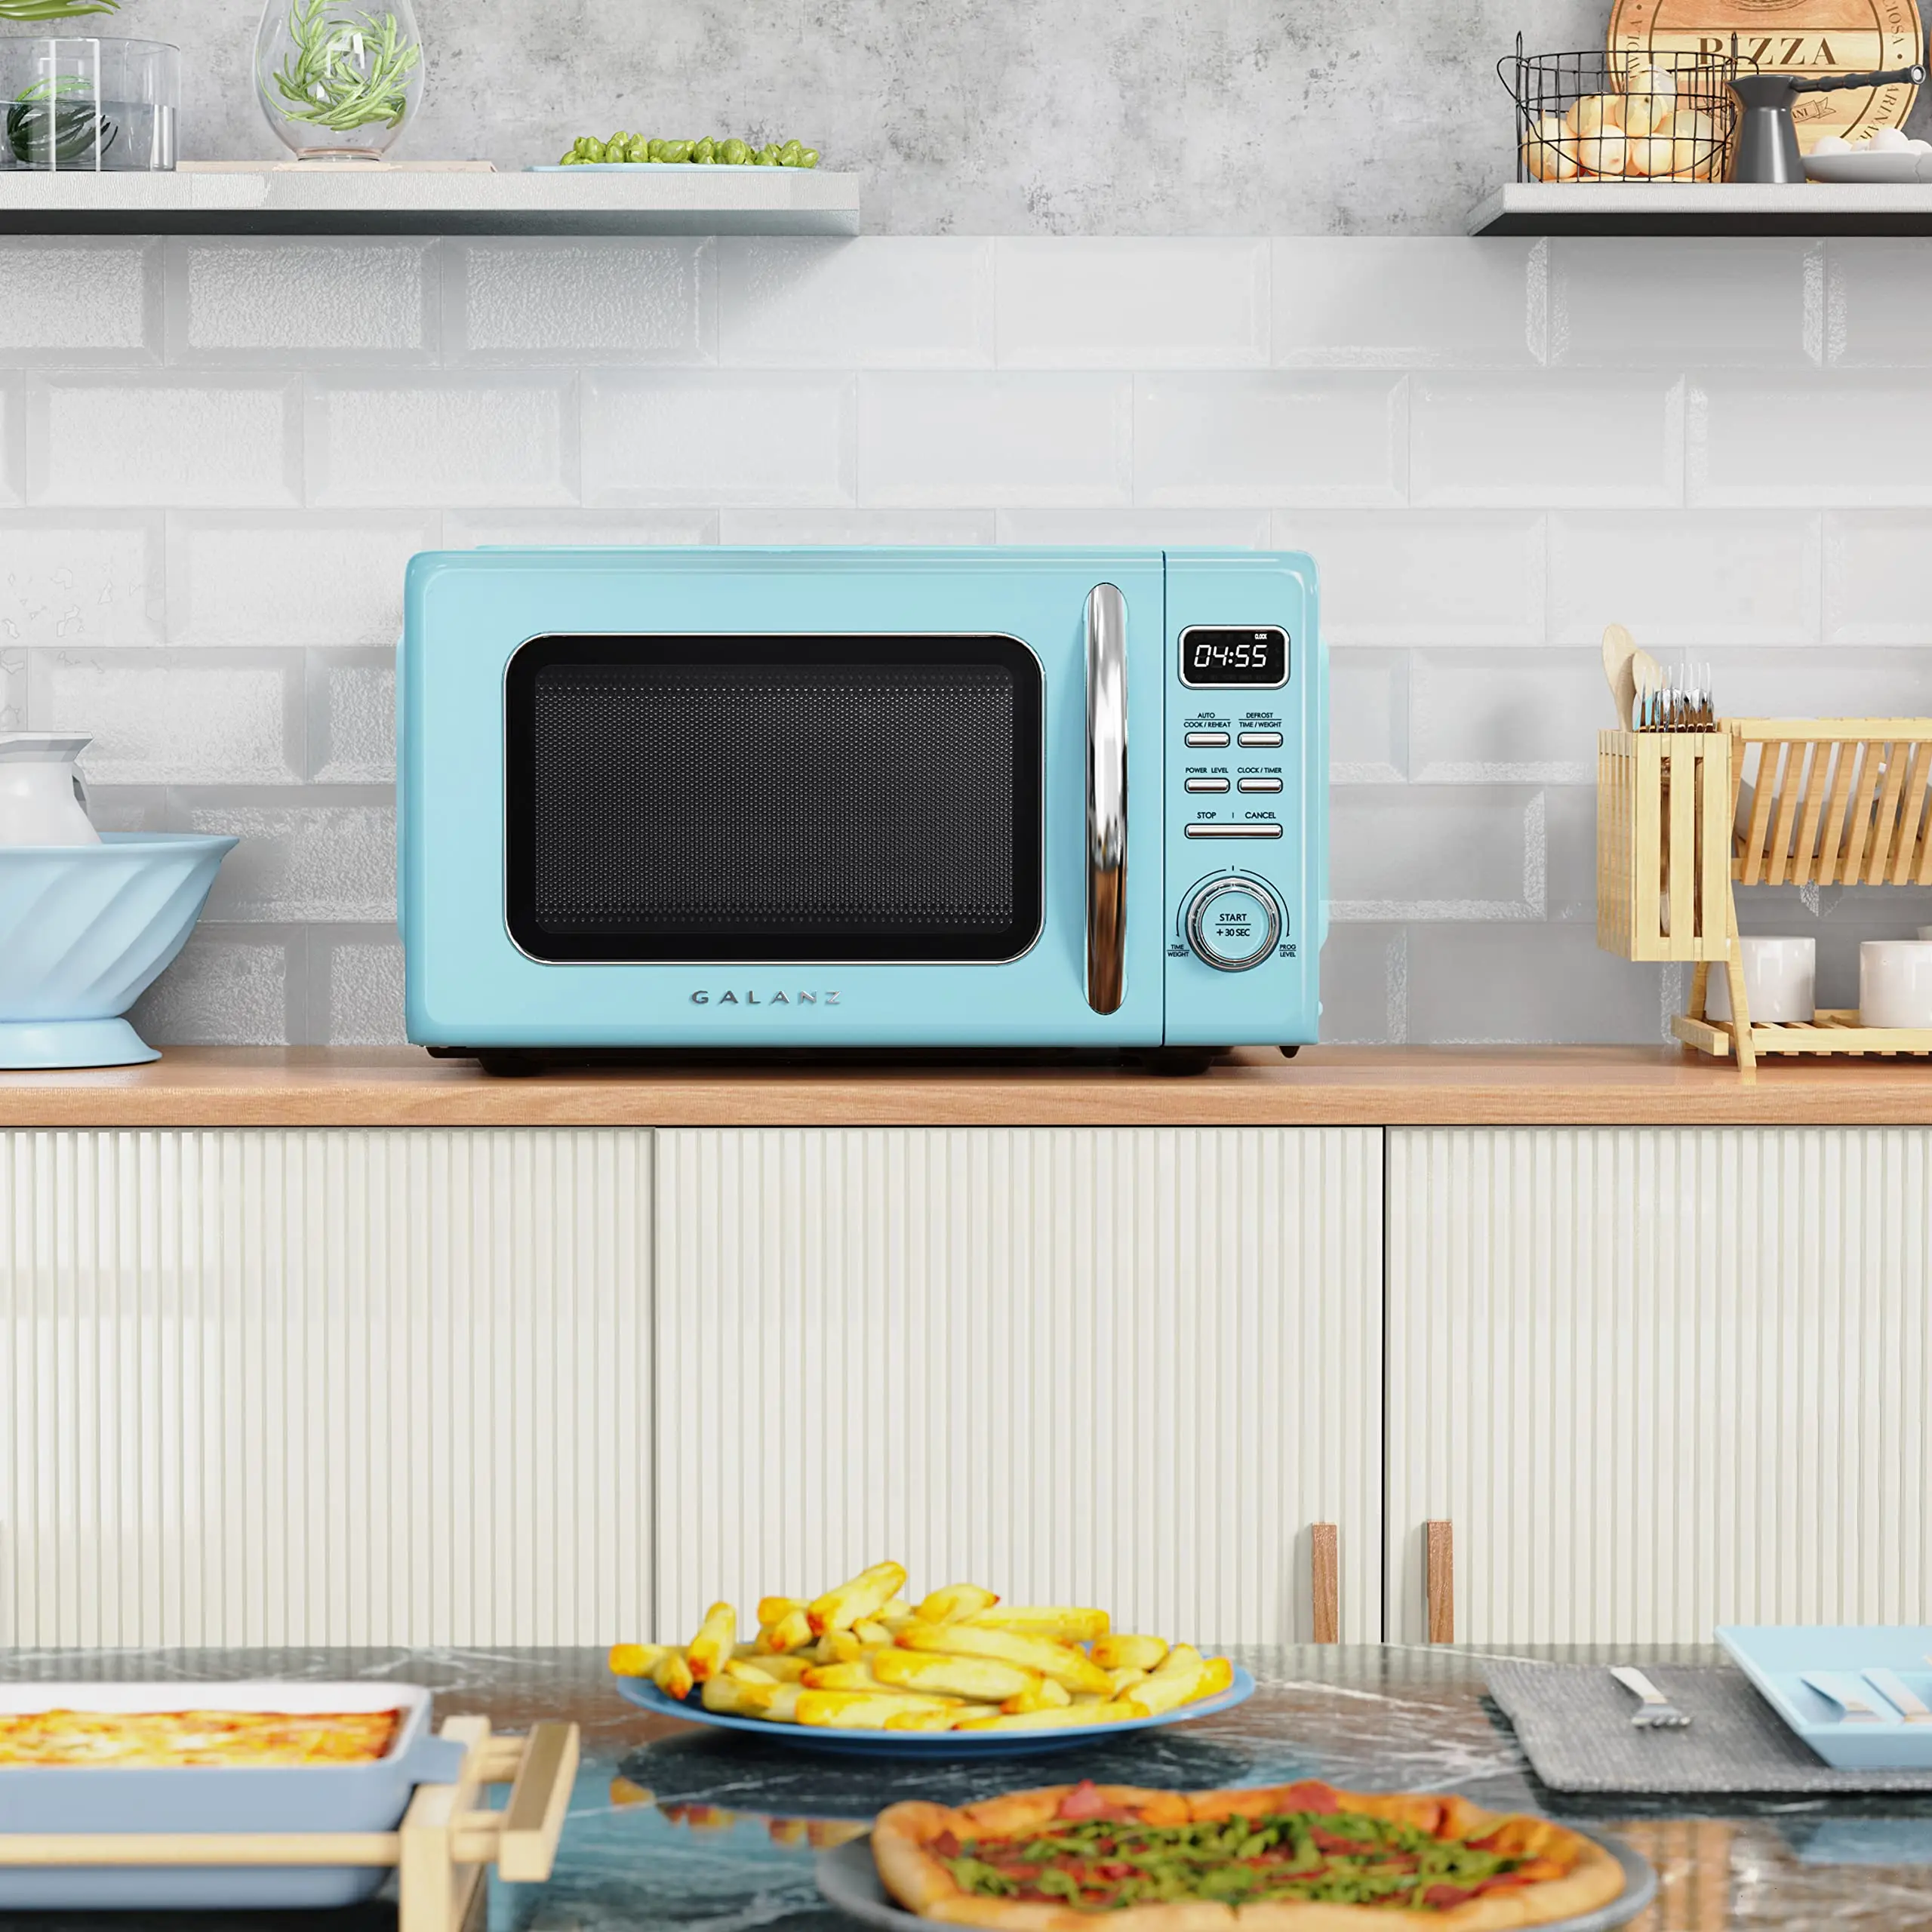 Retro Countertop Microwave Oven with Auto Cook & Reheat, Defrost, Quick Start Functions, Pull Handle.7 cu ft, Blue быстросборная автоматическая палатка xiaomi chao multi scene quick opening tent sea blue yc skzp01